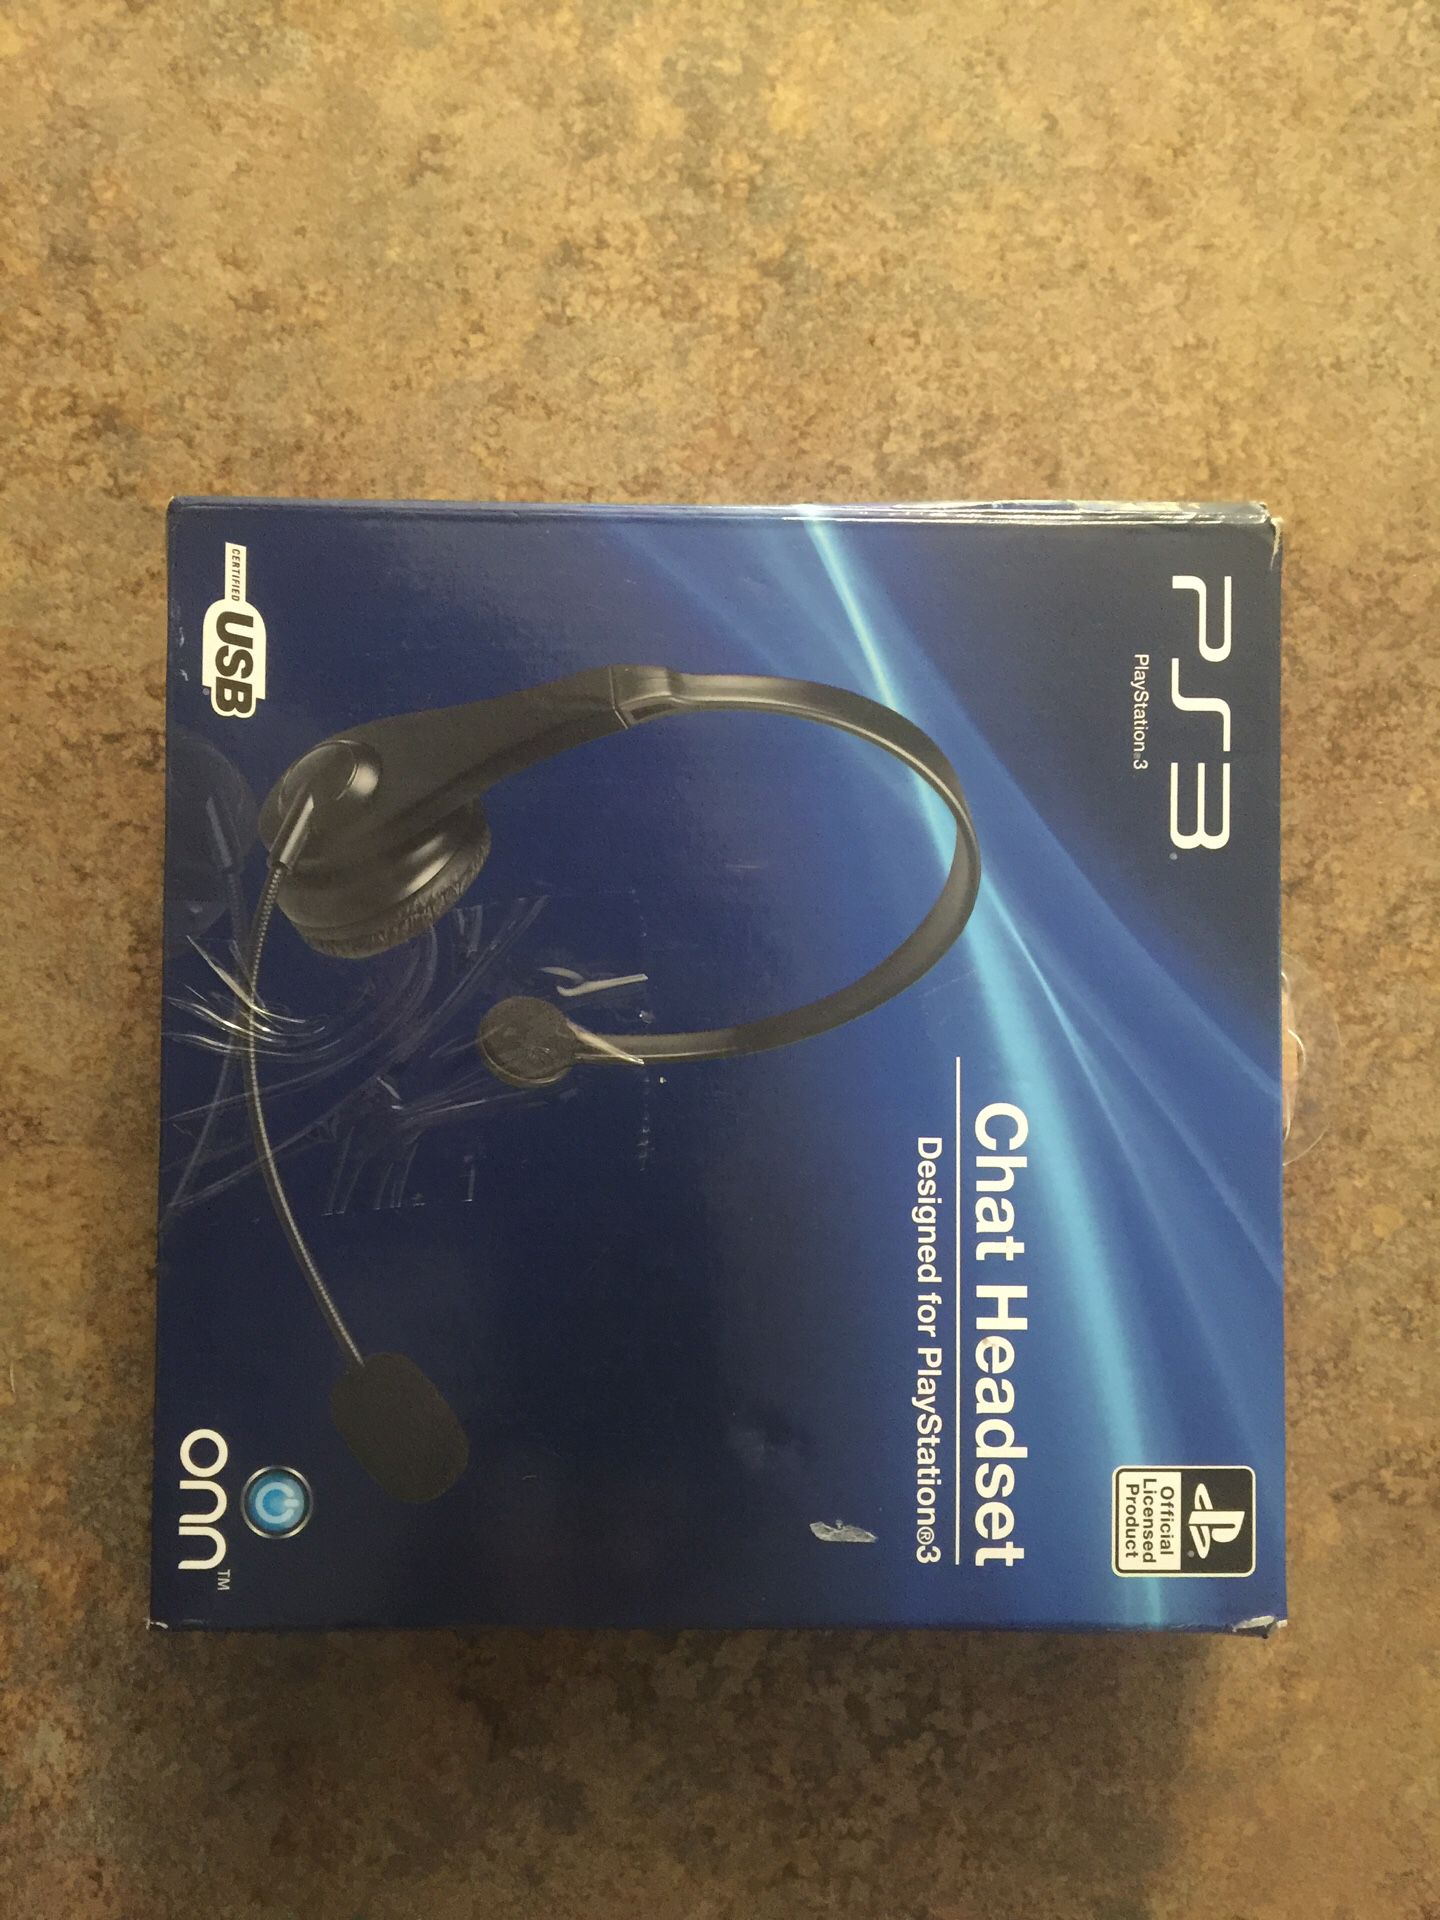 PS3 Chat Headset USB